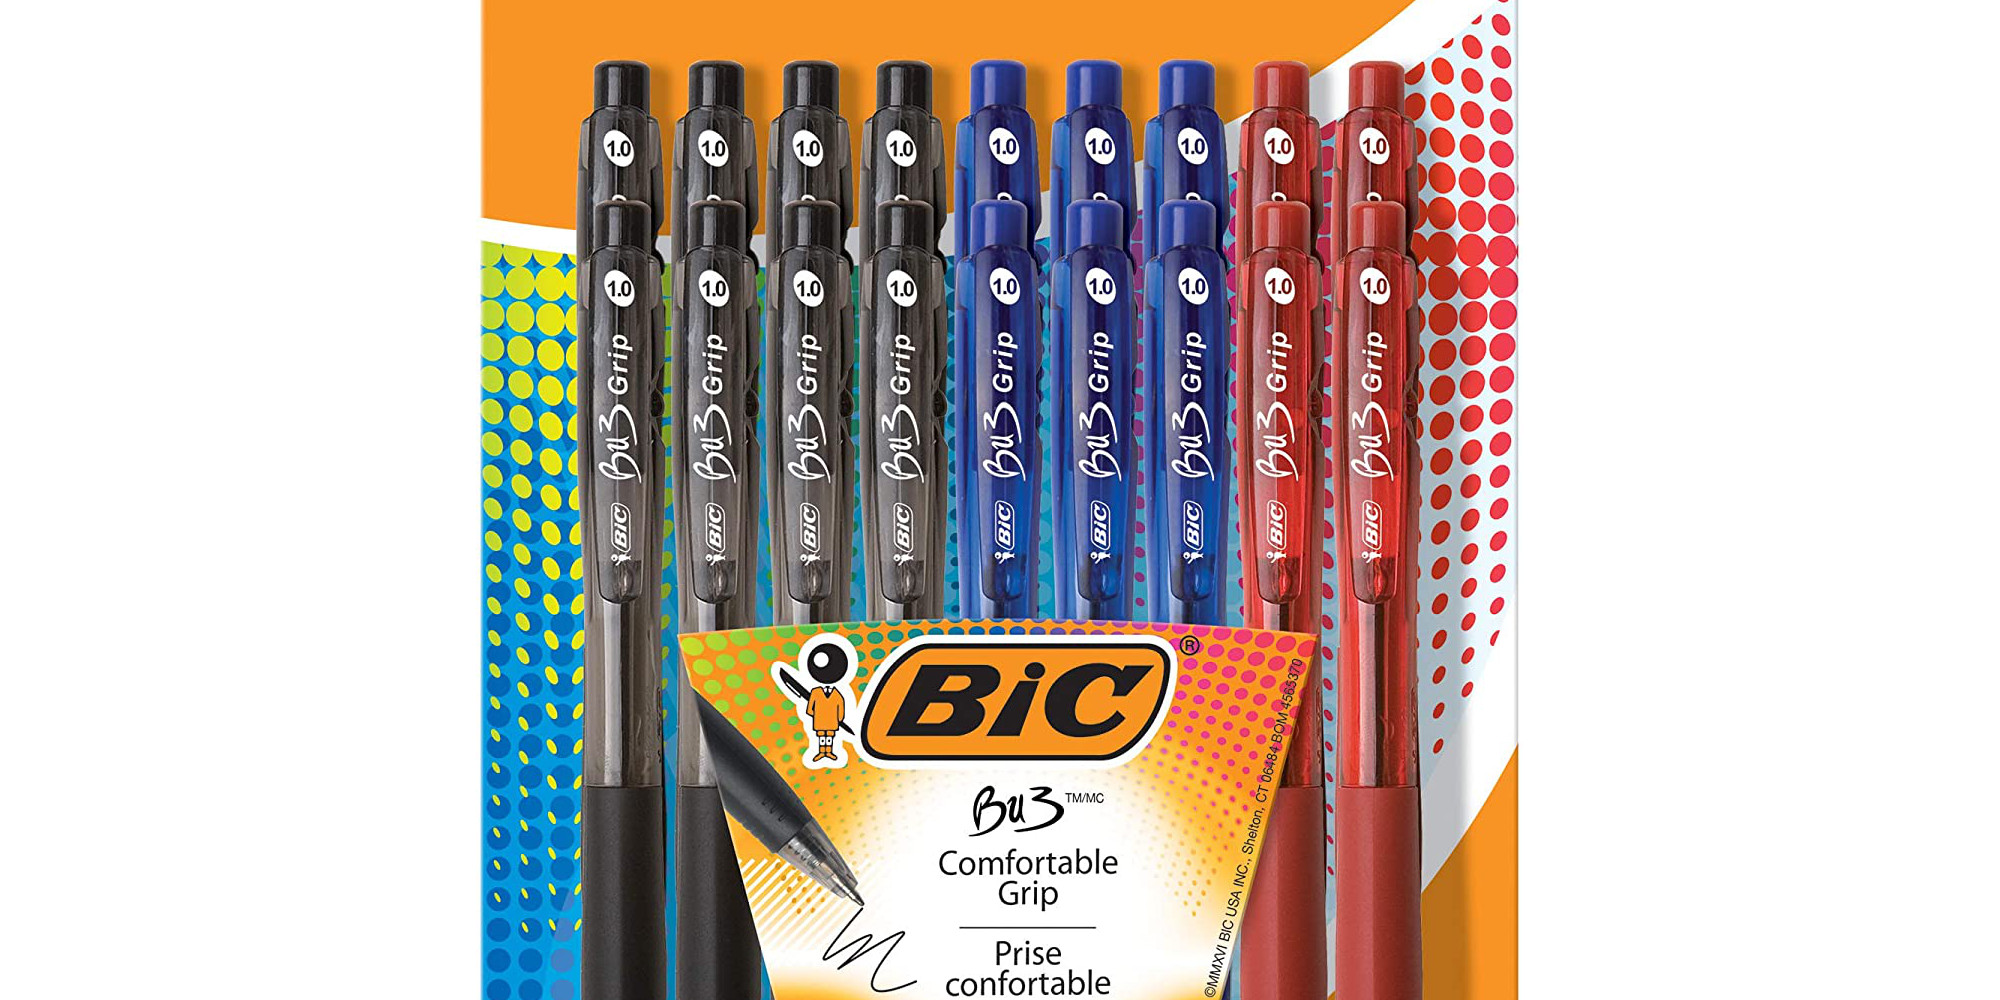 Amazon 1-day school and office supply BIC sale from $2.50 (Up to 